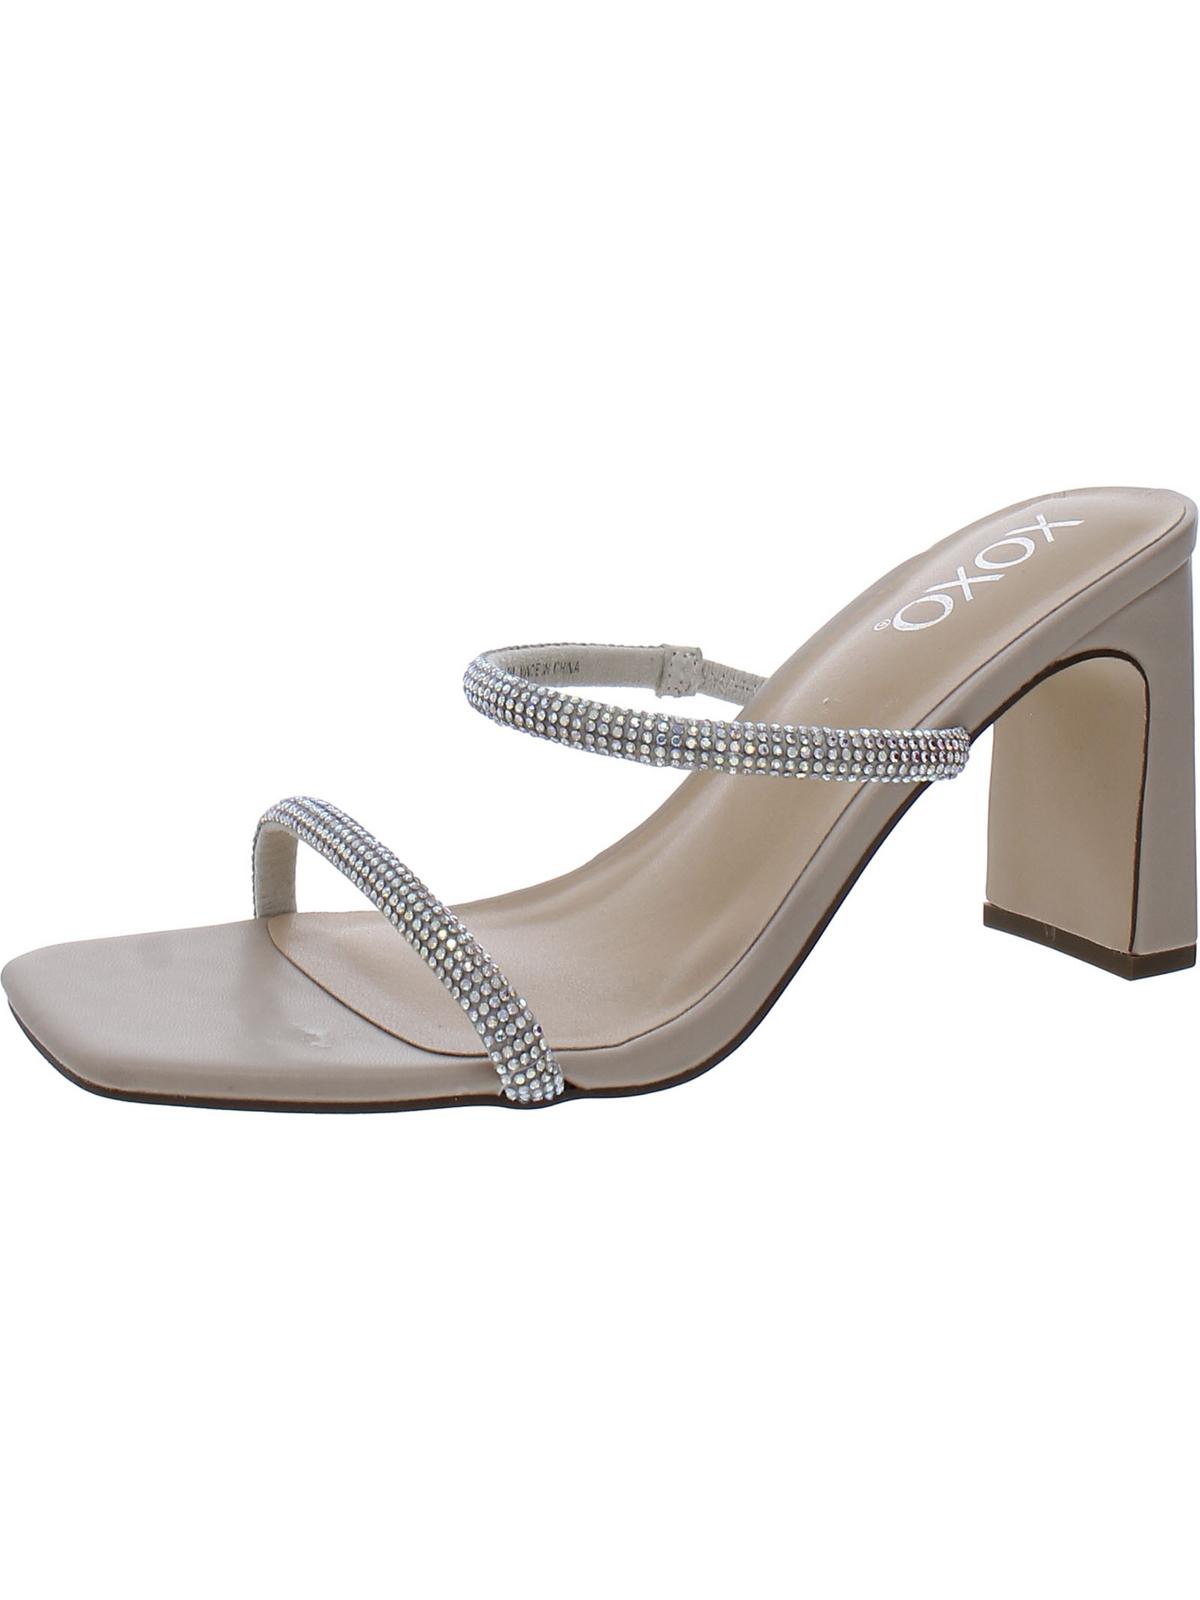 Xoxo Folee Womens Faux Suede Slide Sandals In Gray